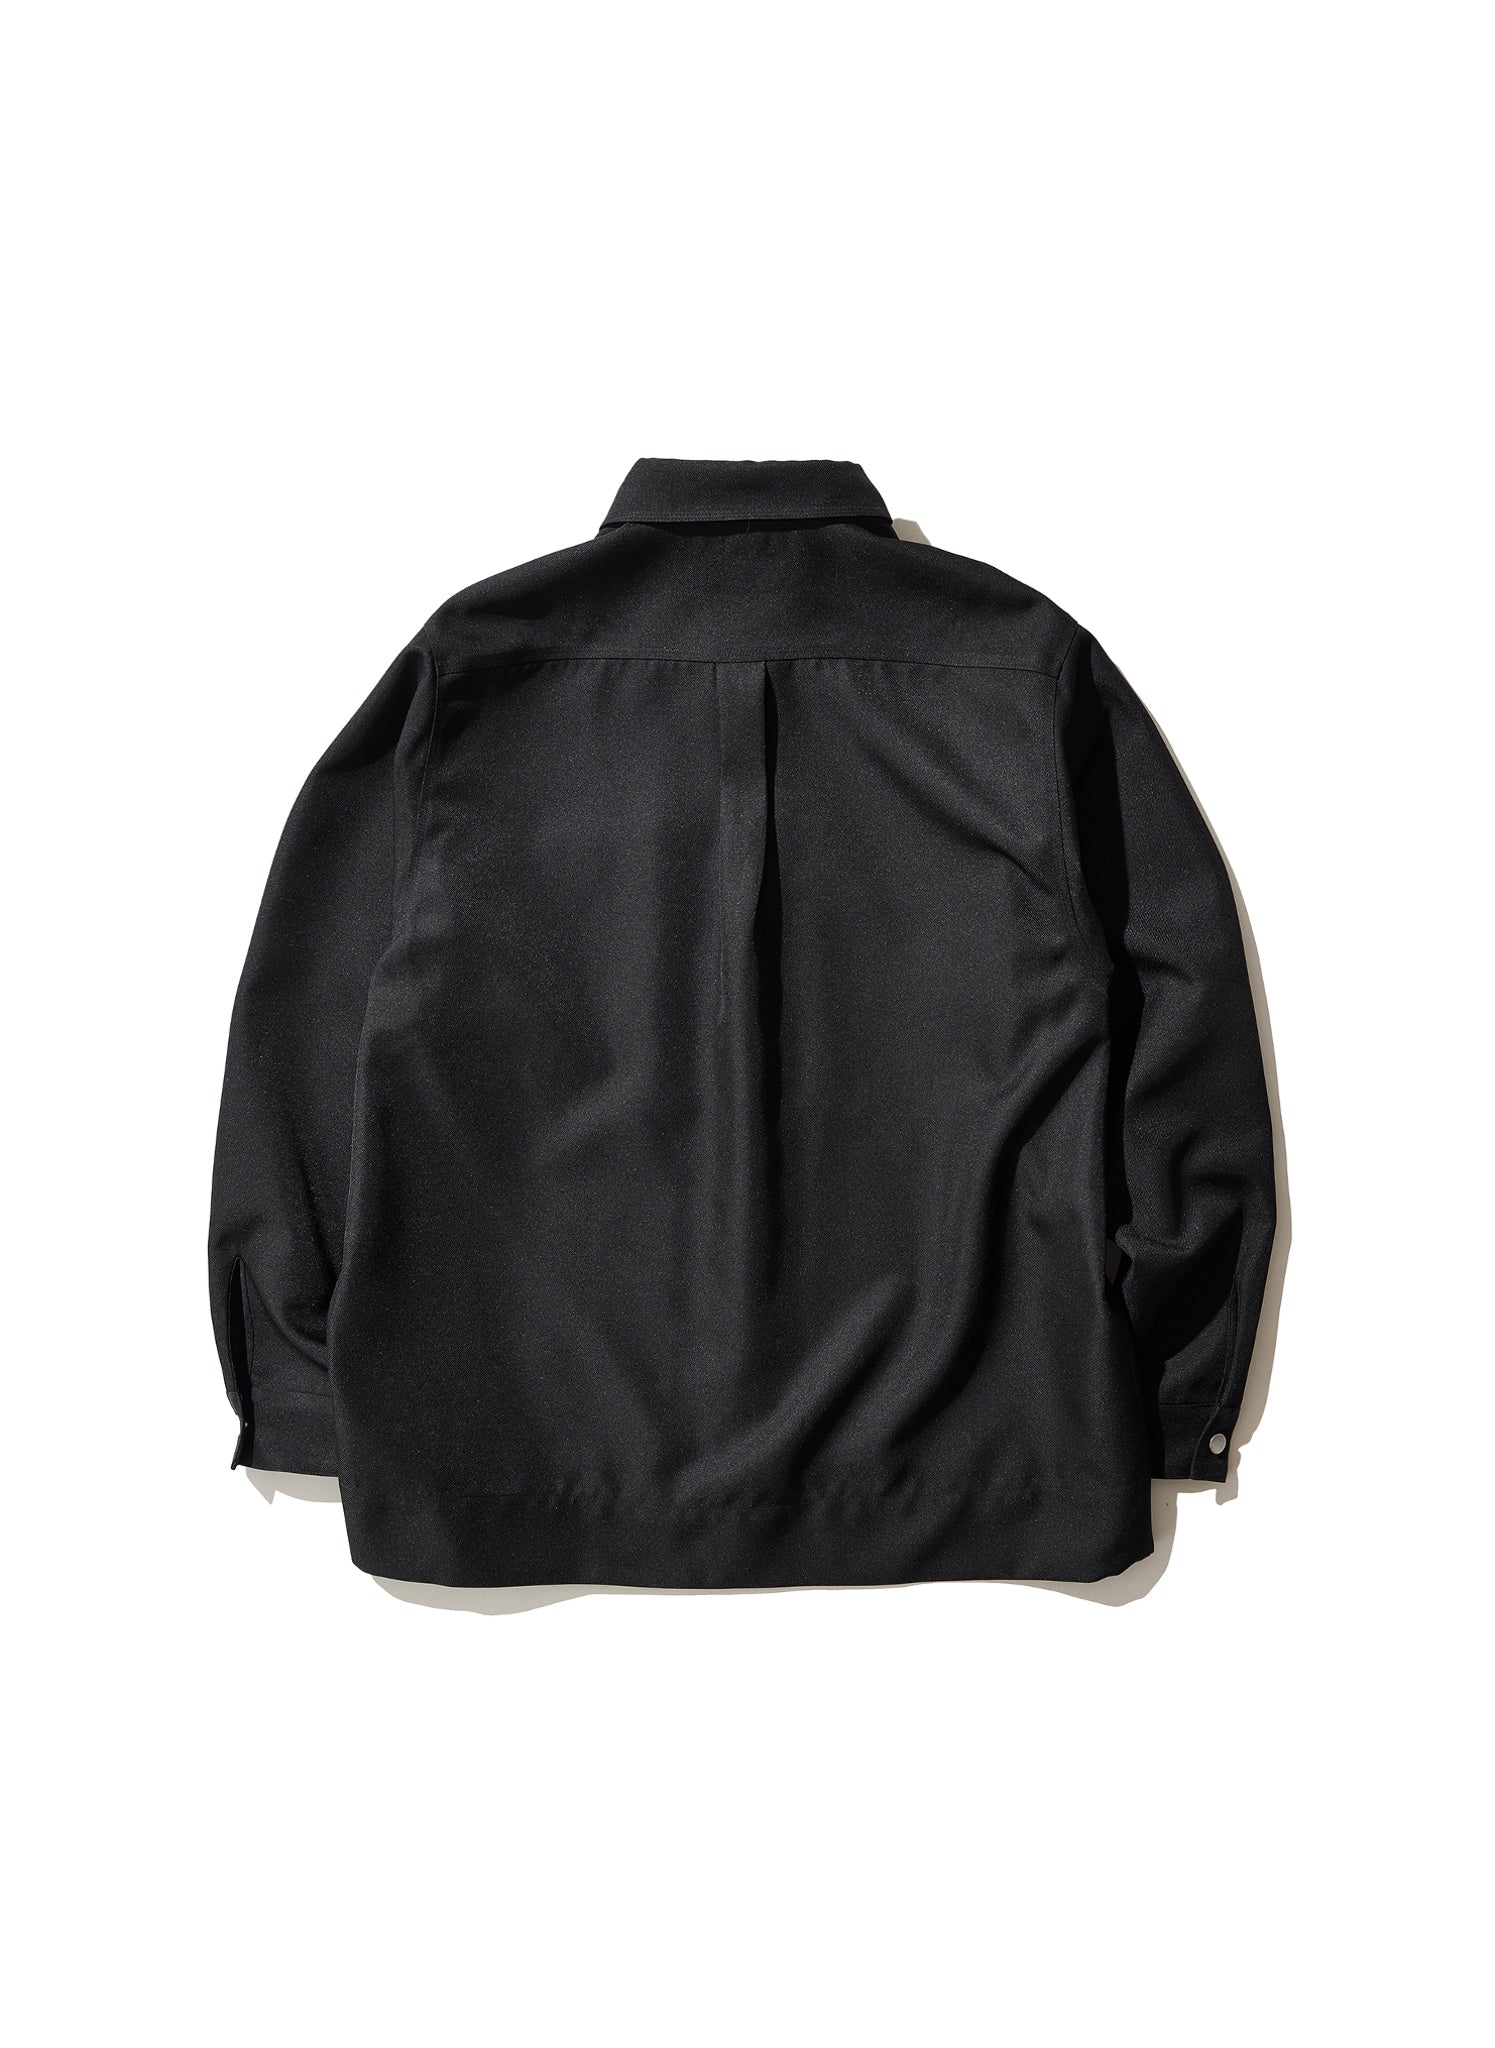 <span style="color: #f50b0b;">Last One</span> 
WILLY CHAVARRIA / ZIP PLACKET LS SHIRT RECYCTEX BLACK